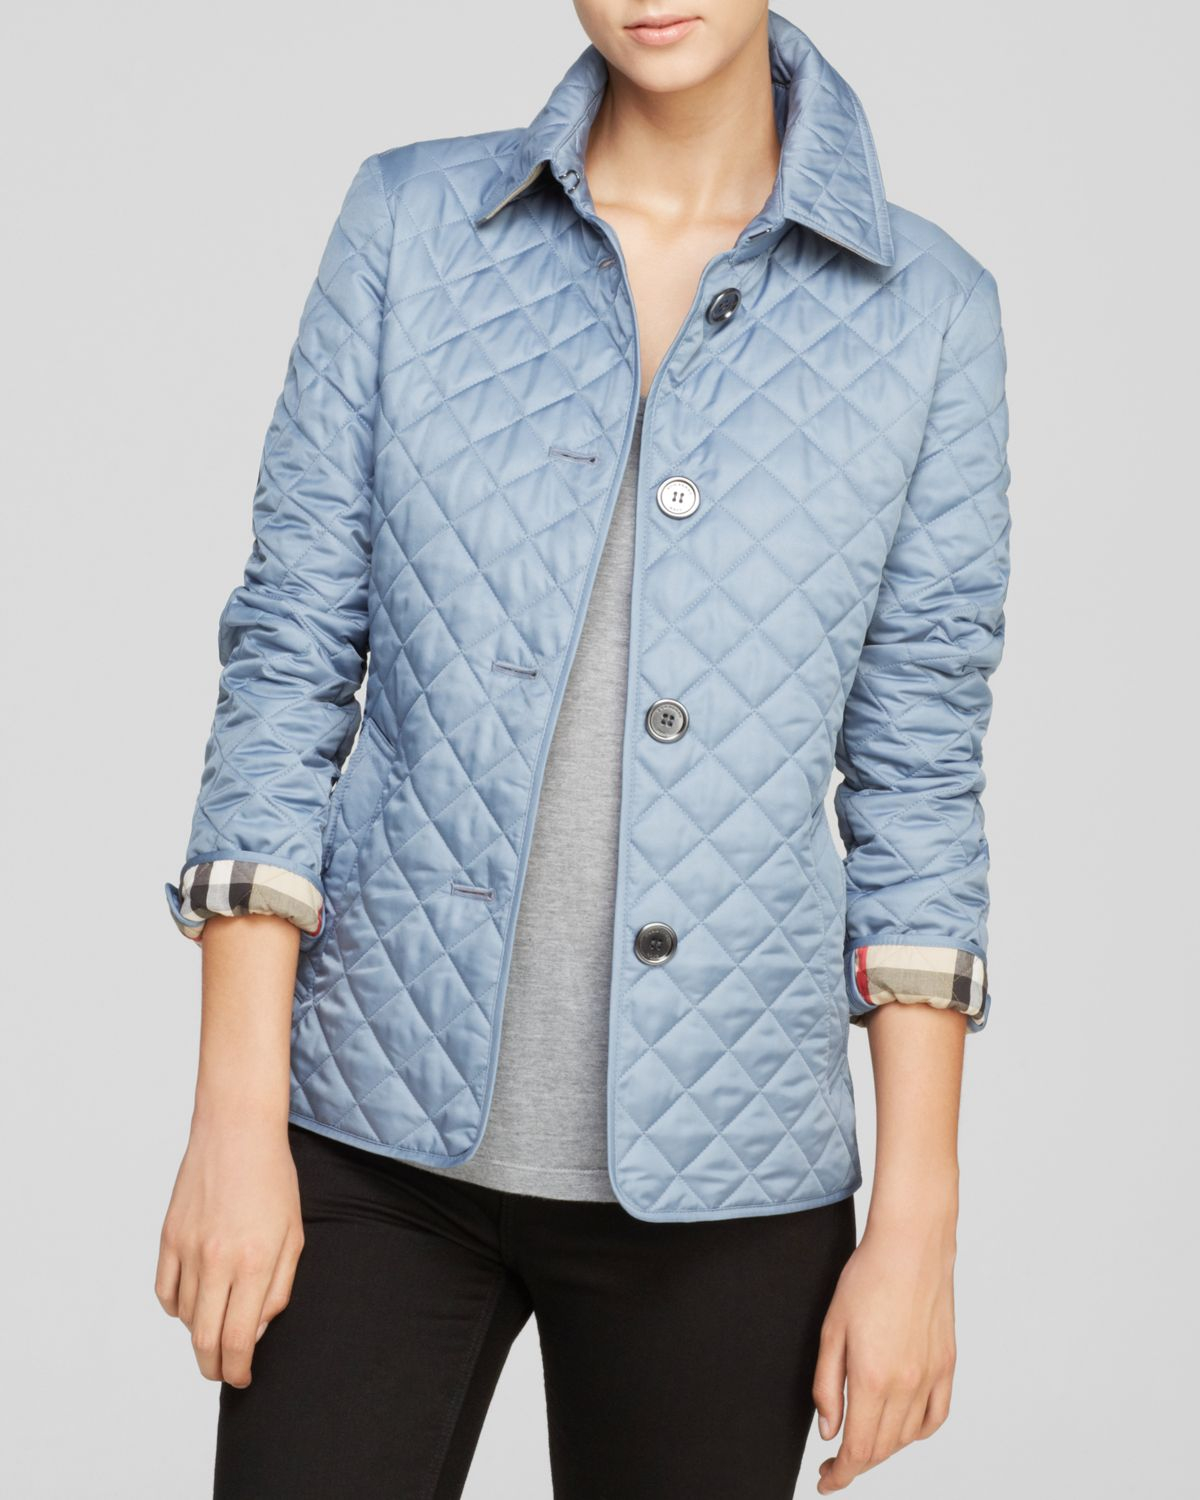 Burberry Brit Diamond Quilted Jacket in Blue | Lyst